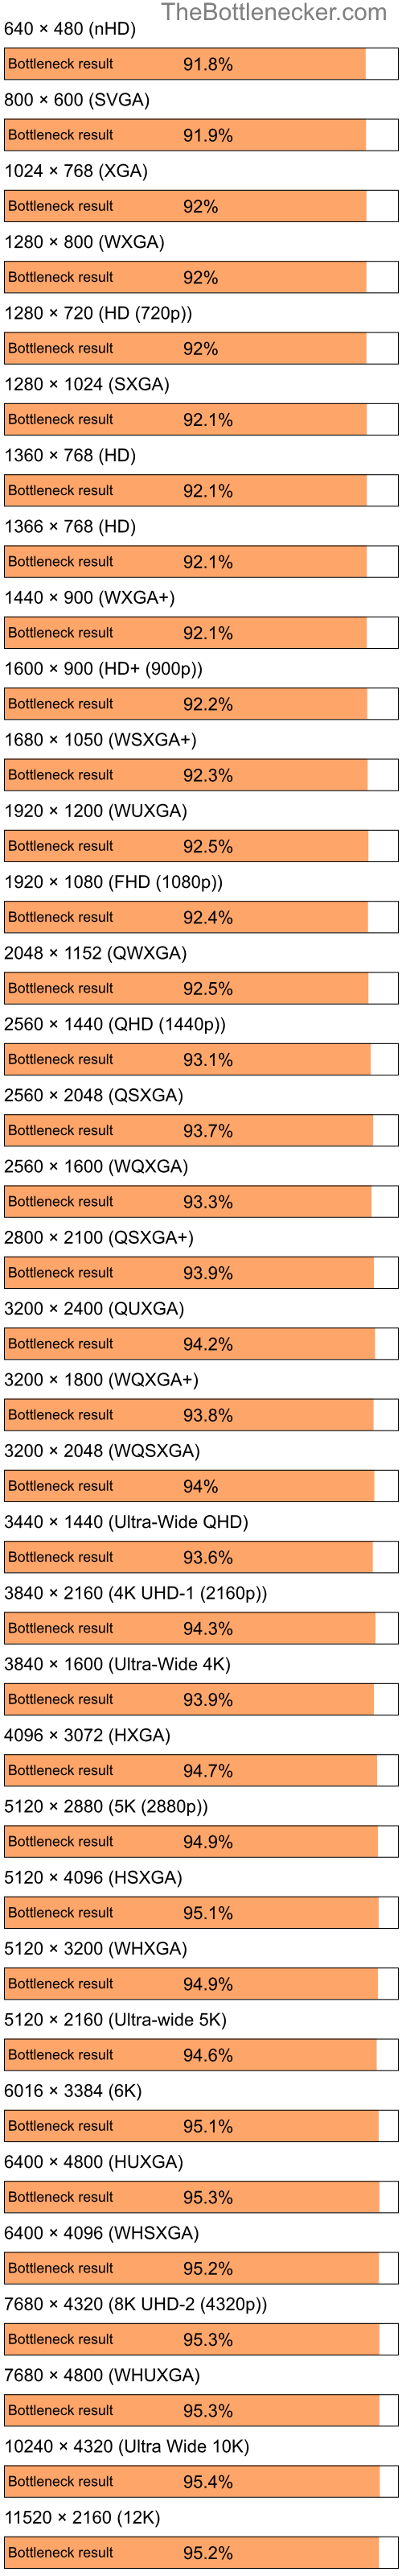 Bottleneck results by resolution for Intel Atom N270 and AMD Mobility Radeon 9200 in7 Days to Die